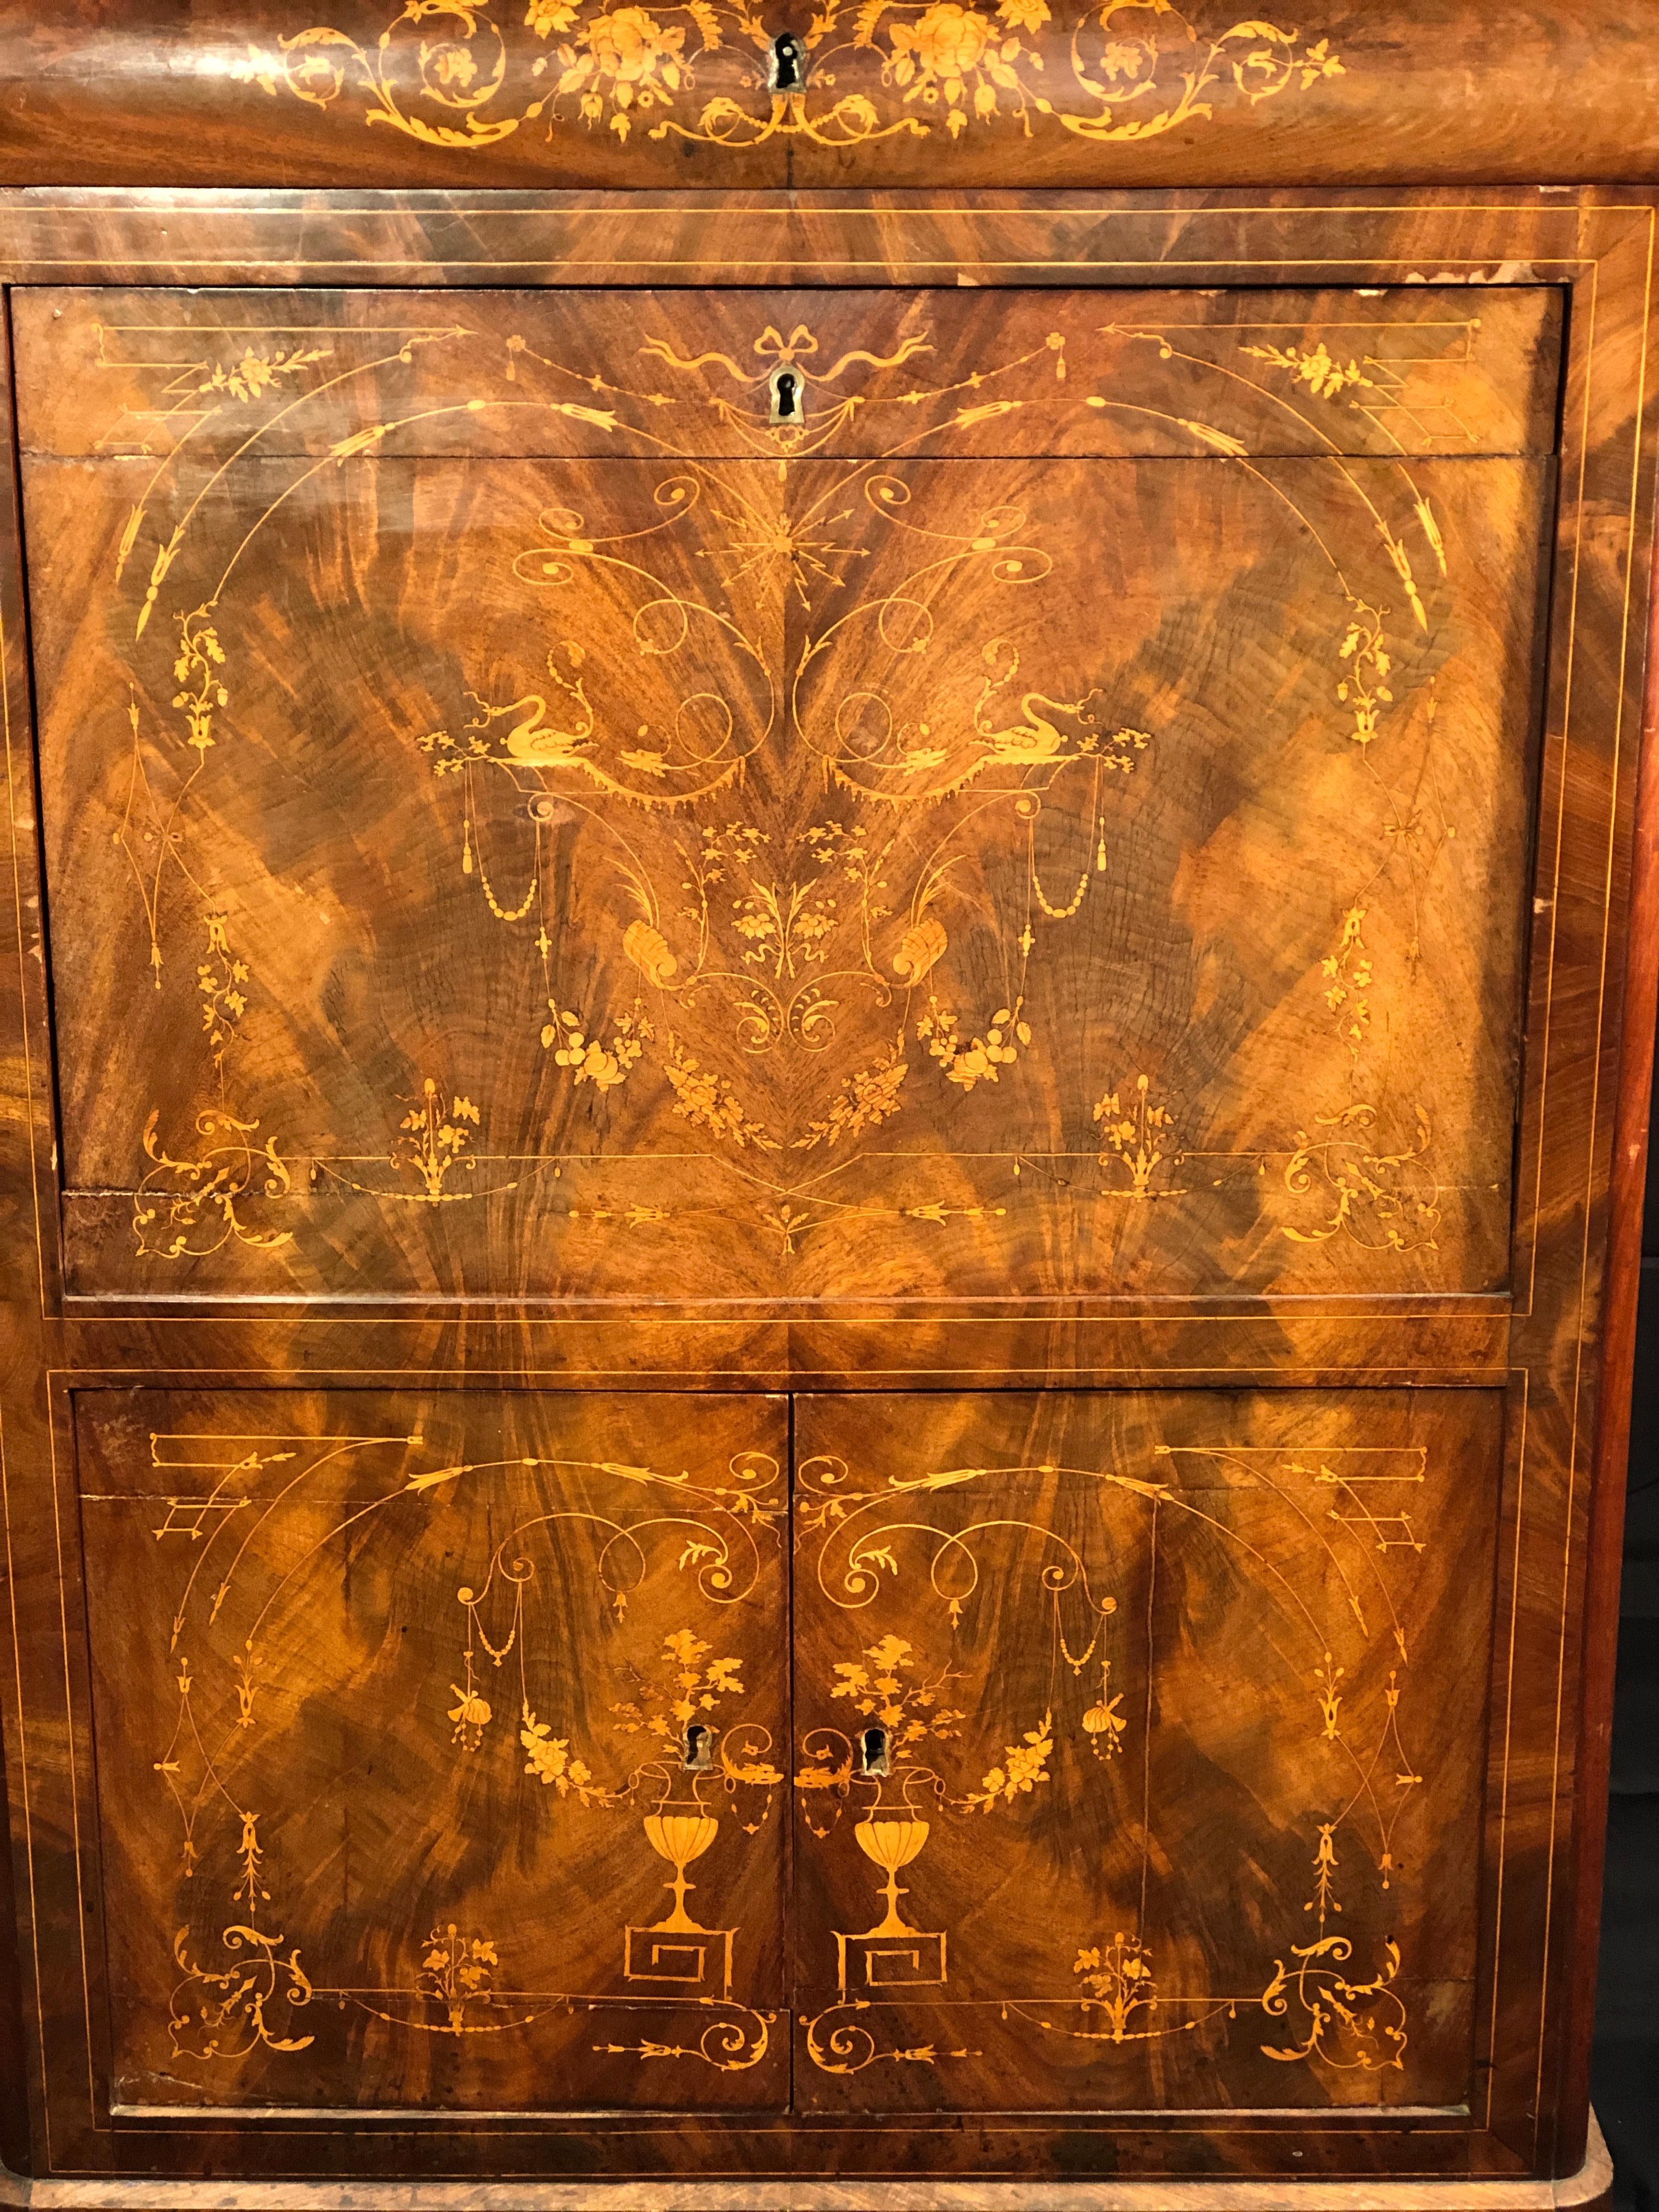 Fantastic example of Secretaire Carlo X, attributed to L.E. Lemarchand (1795-1872), in mahogany wood, finely inlaid with decorative elements and animals. Carrara white marble on the floor, of the era. About 1830. To be restored, small faults and